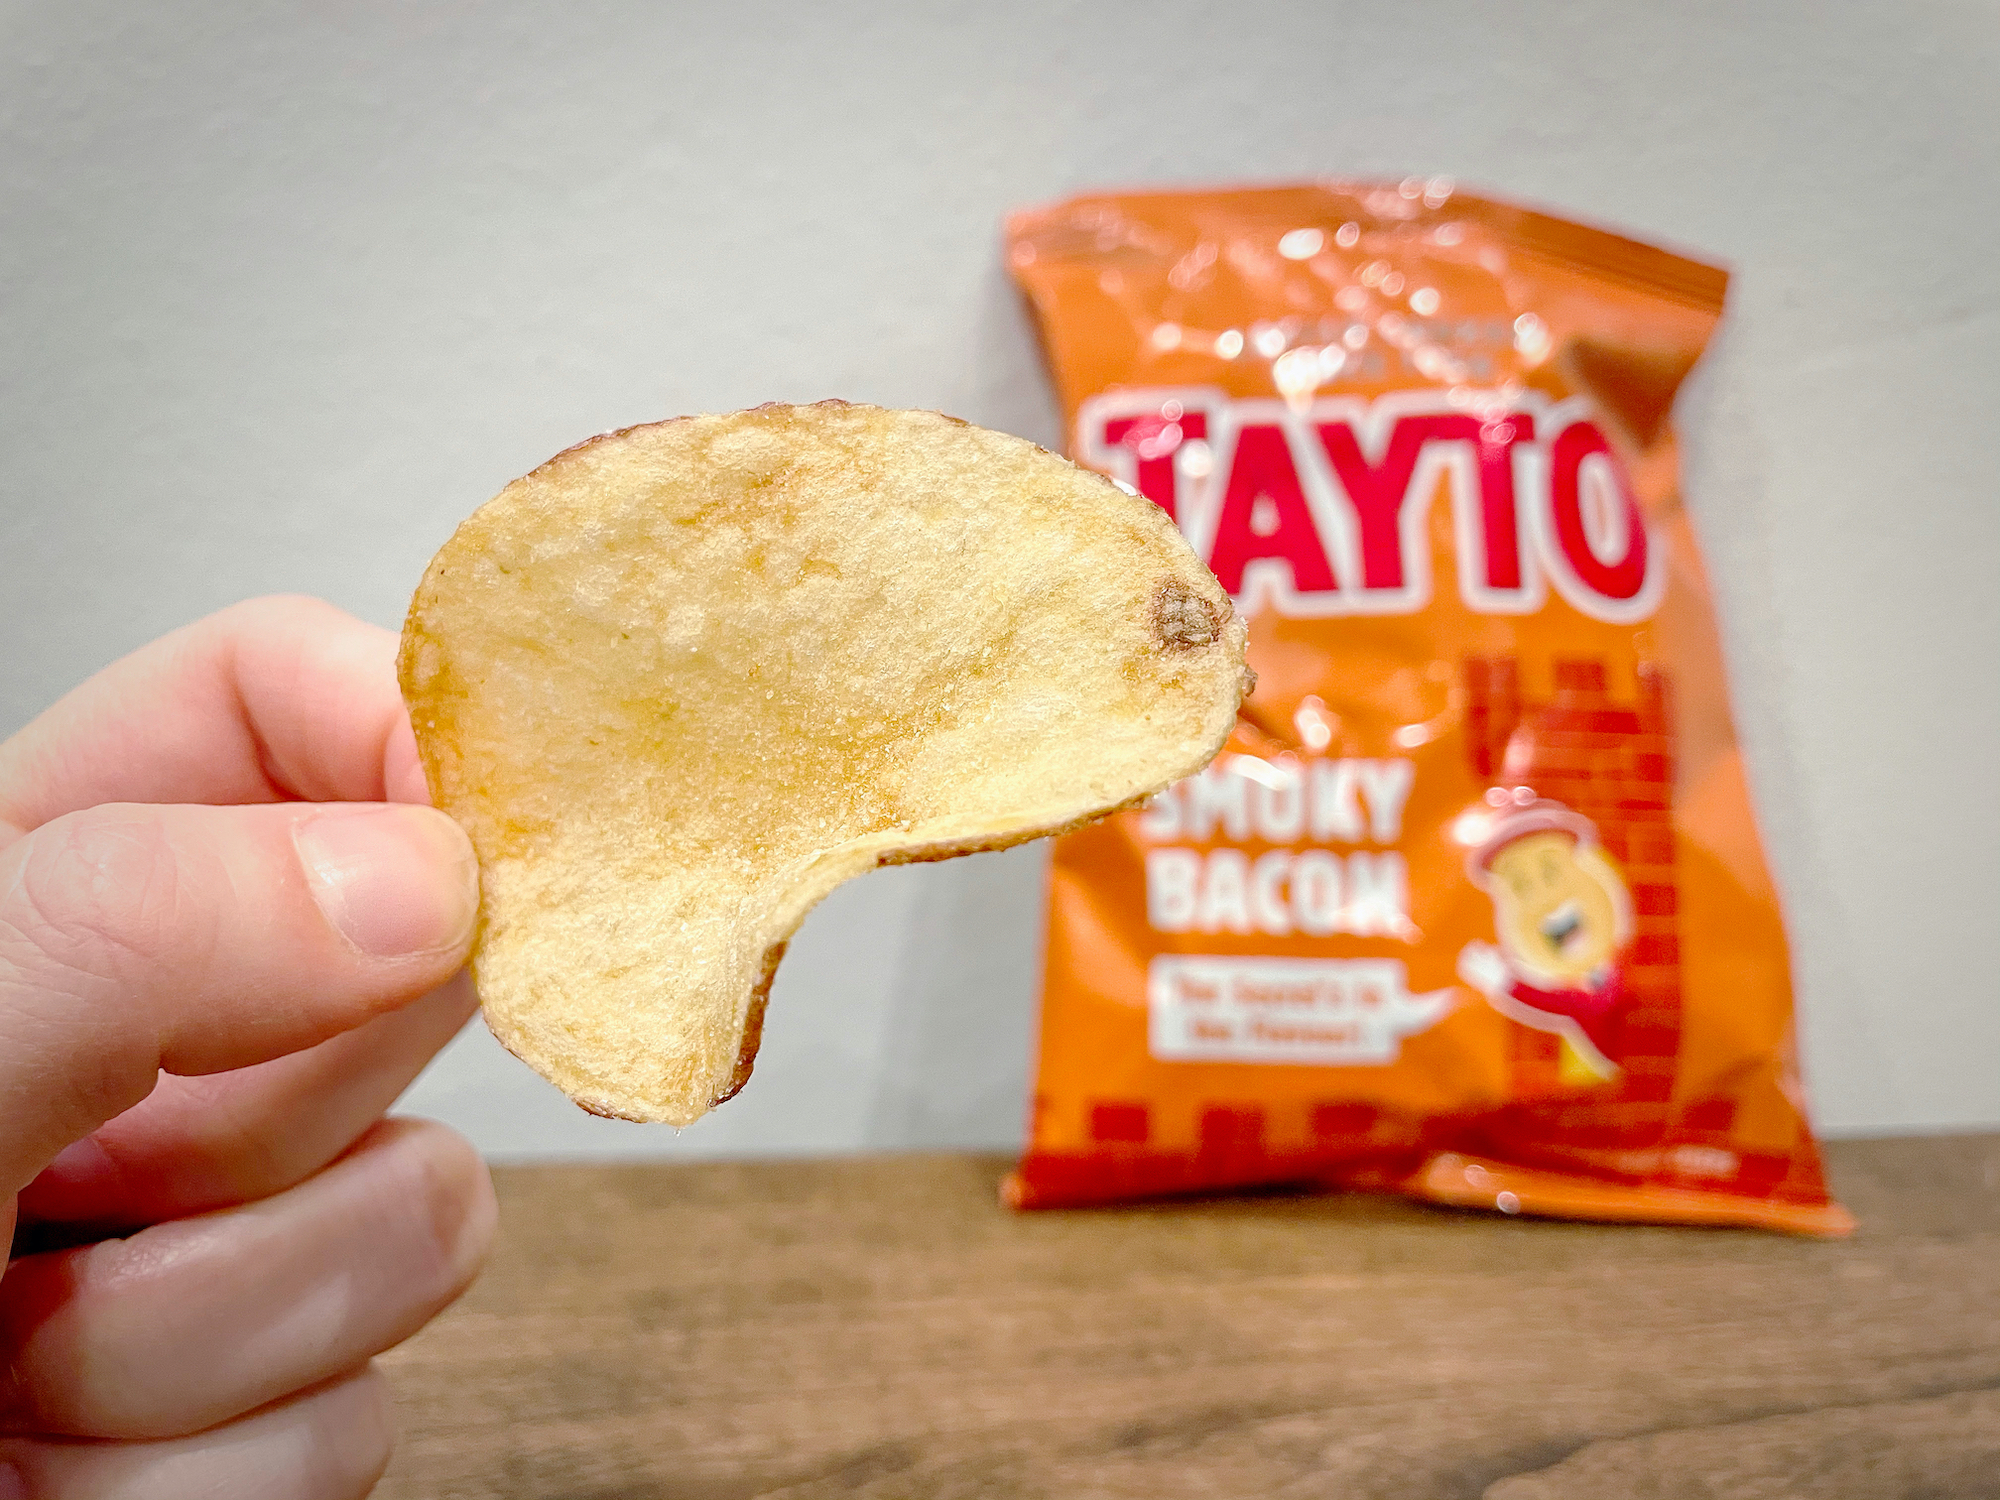 Close-up of a Tayto Smoky Bacon Crisps with a bag blurred in the background